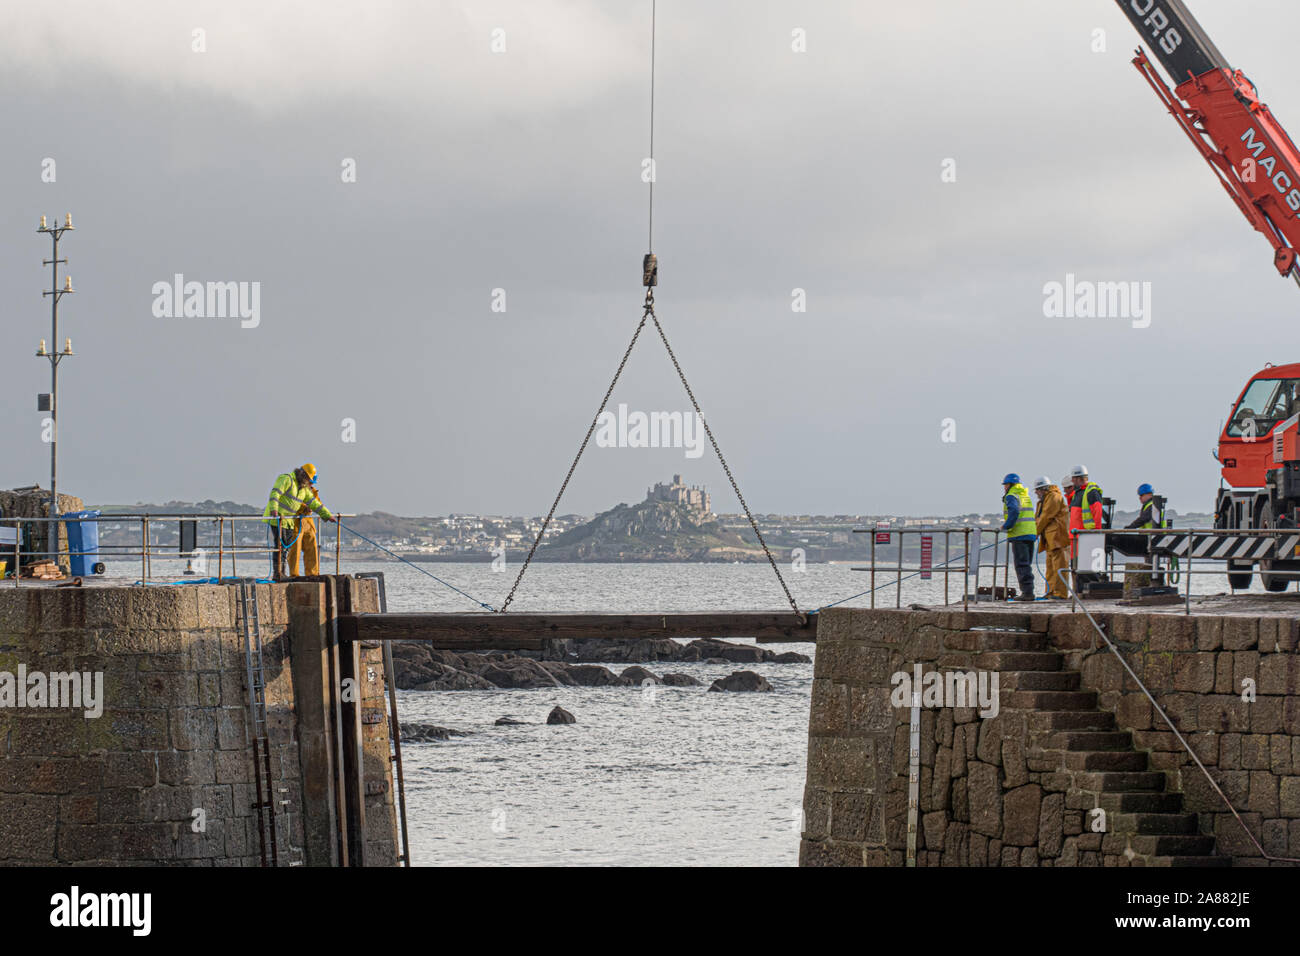 Mousehole, Cornwall, UK, 7th November 2019. UK Weather. Every year giant timber baulks are lowered carefully into the opening of Mousehole harbour,  to protect it from the winter storms. Seen in the background St Michaels Mount at Marazion. Credit Simon Maycock / Alamy Live News. Stock Photo